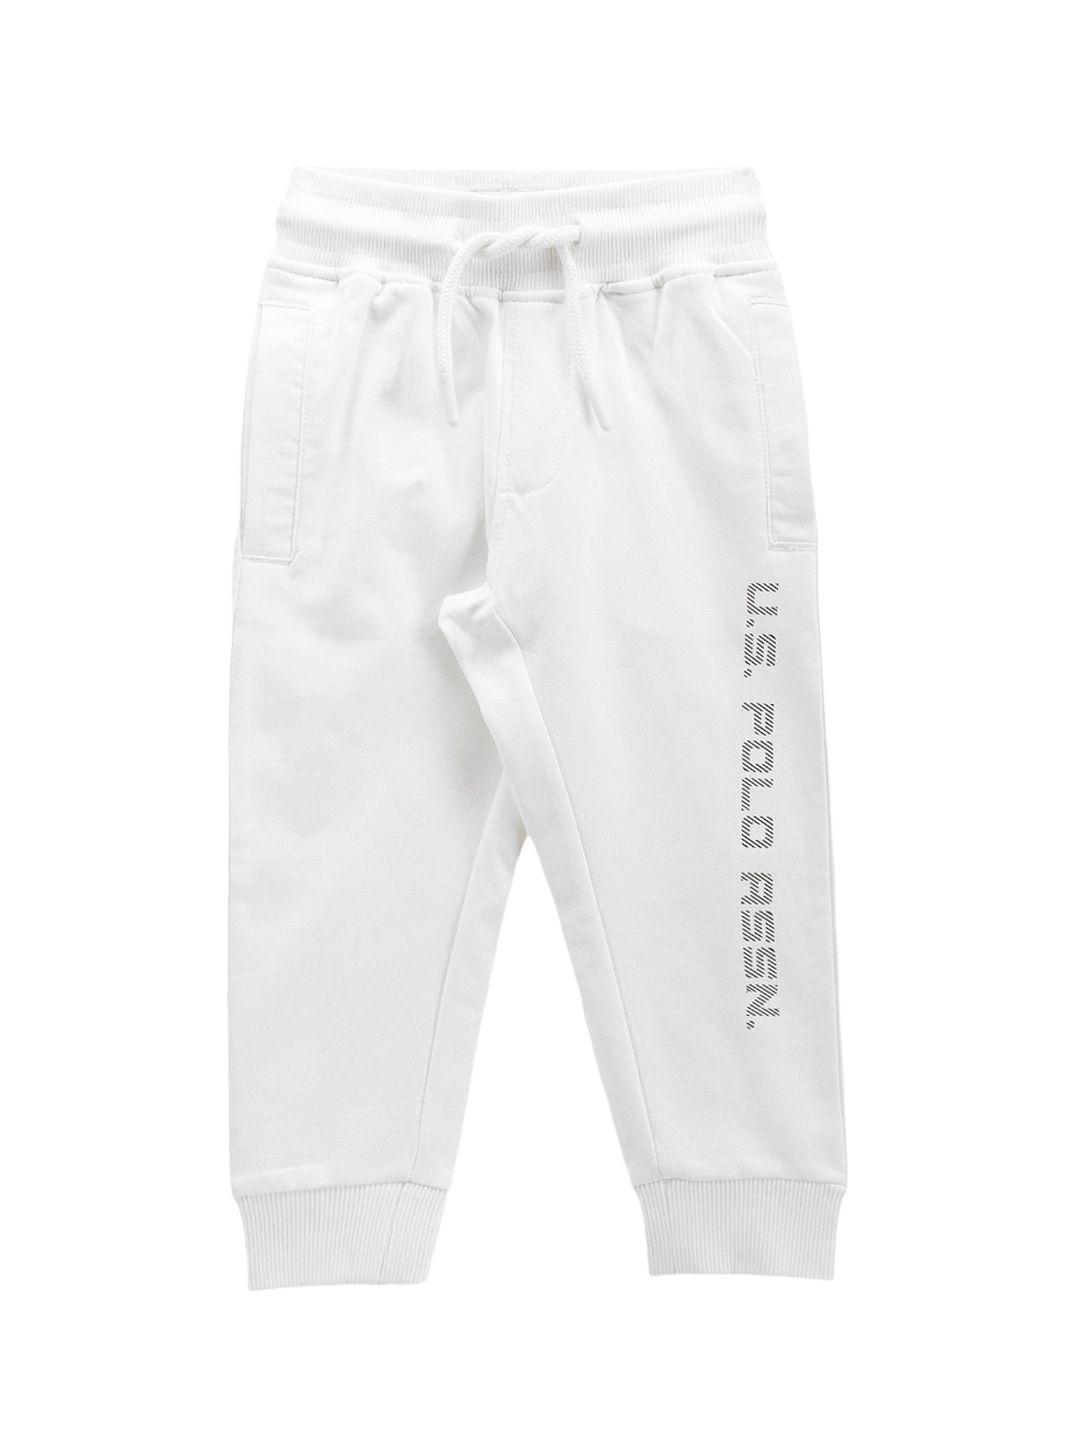 u.s. polo assn. kids boys typography printed mid-rise jogger